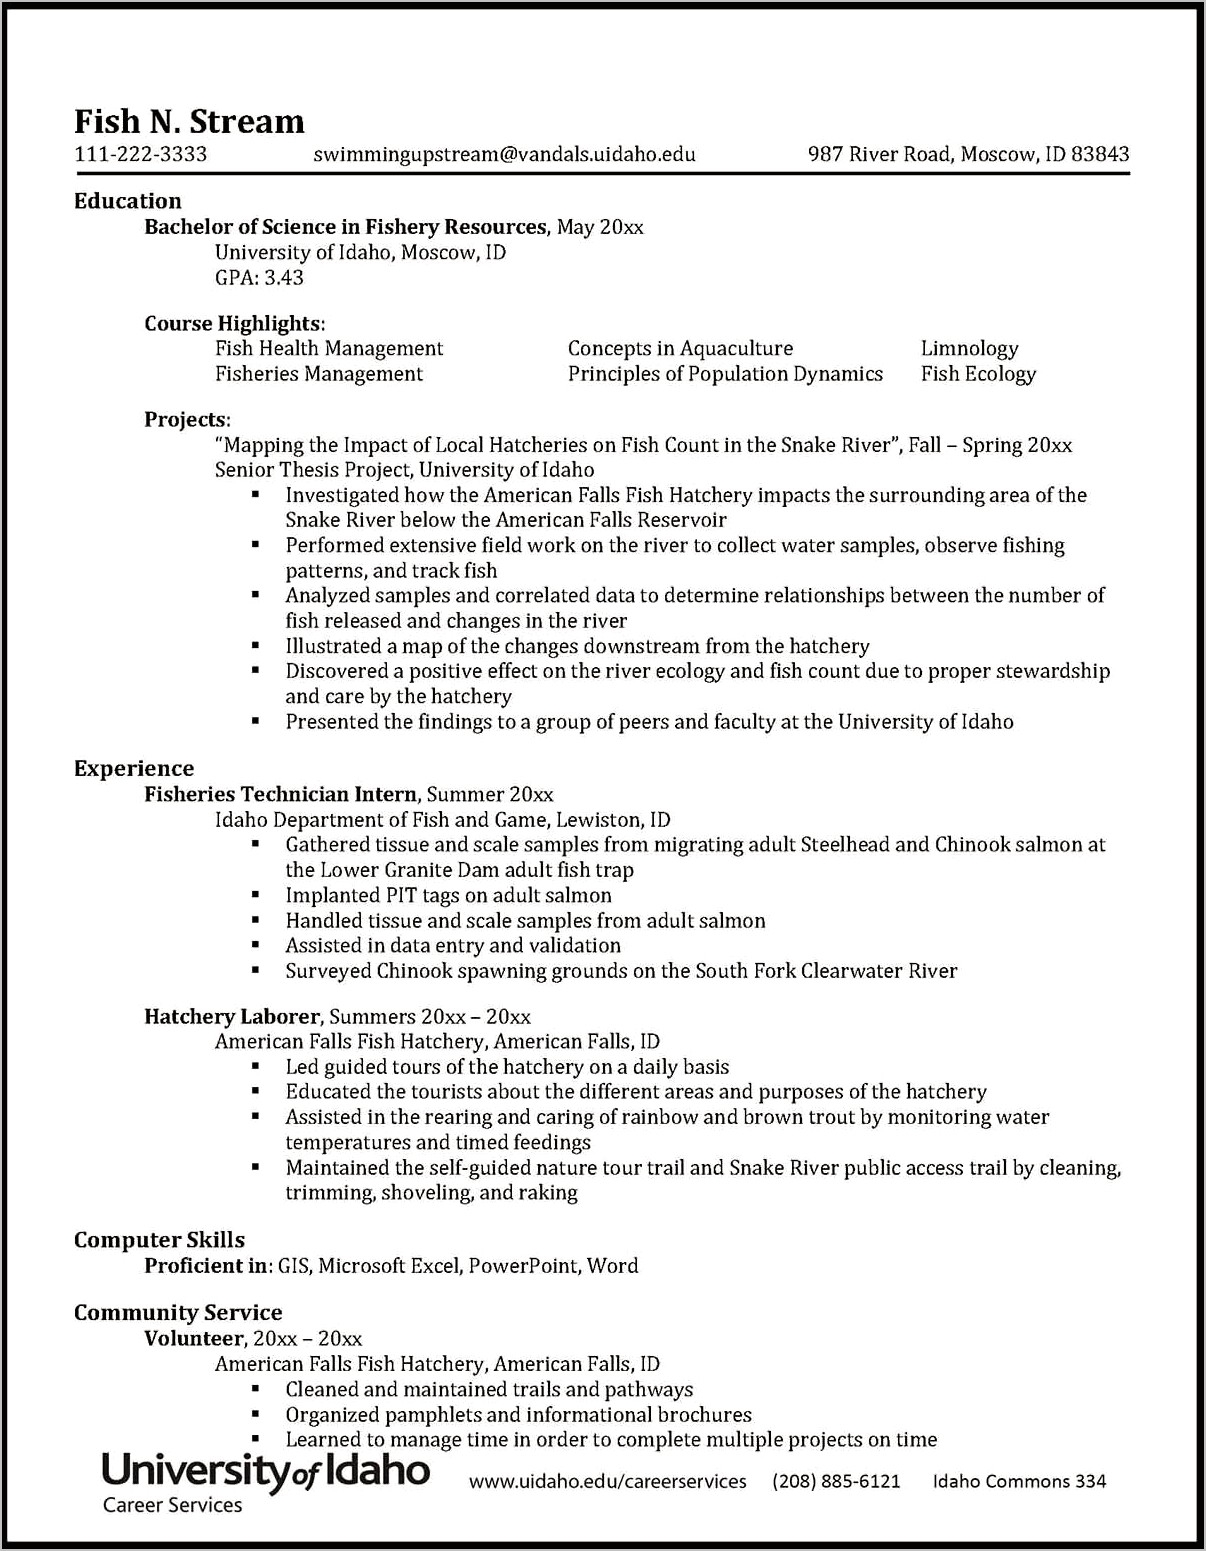 Example Resume Cover Letterfor Natural Resources